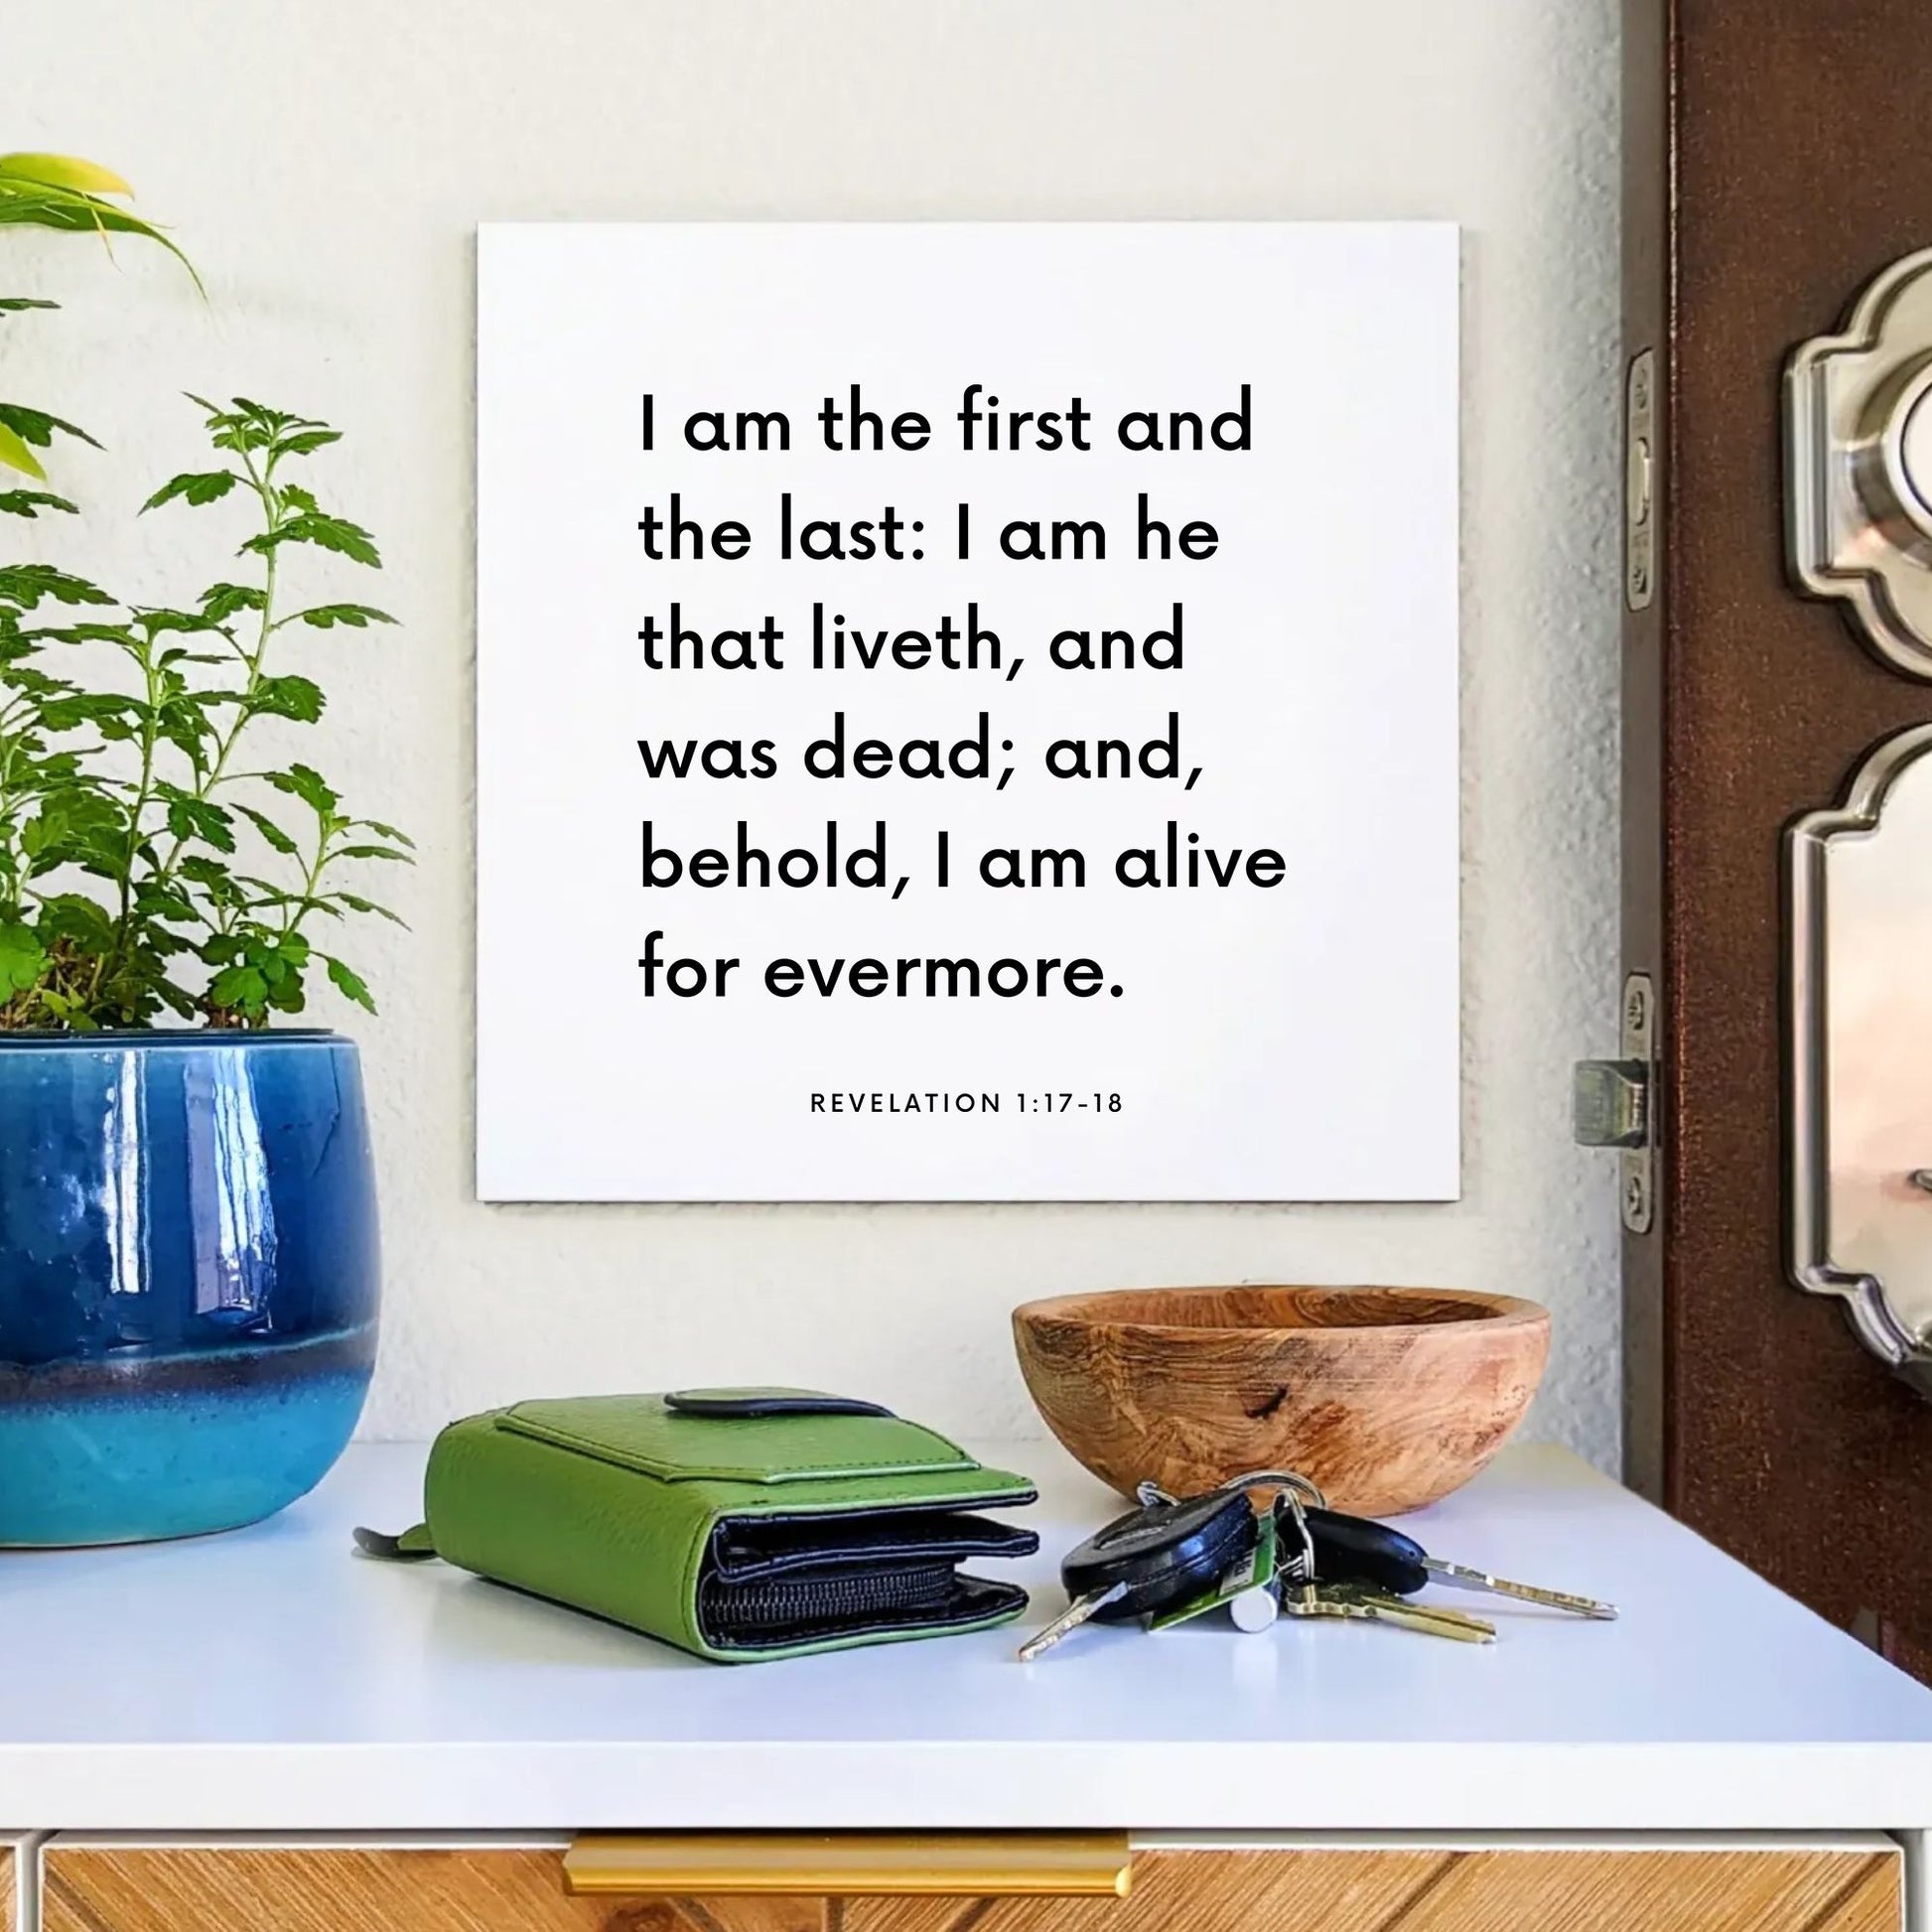 Entryway mouting of the scripture tile for Revelation 1:17-18 - "I am the first and the last: I am he that liveth"